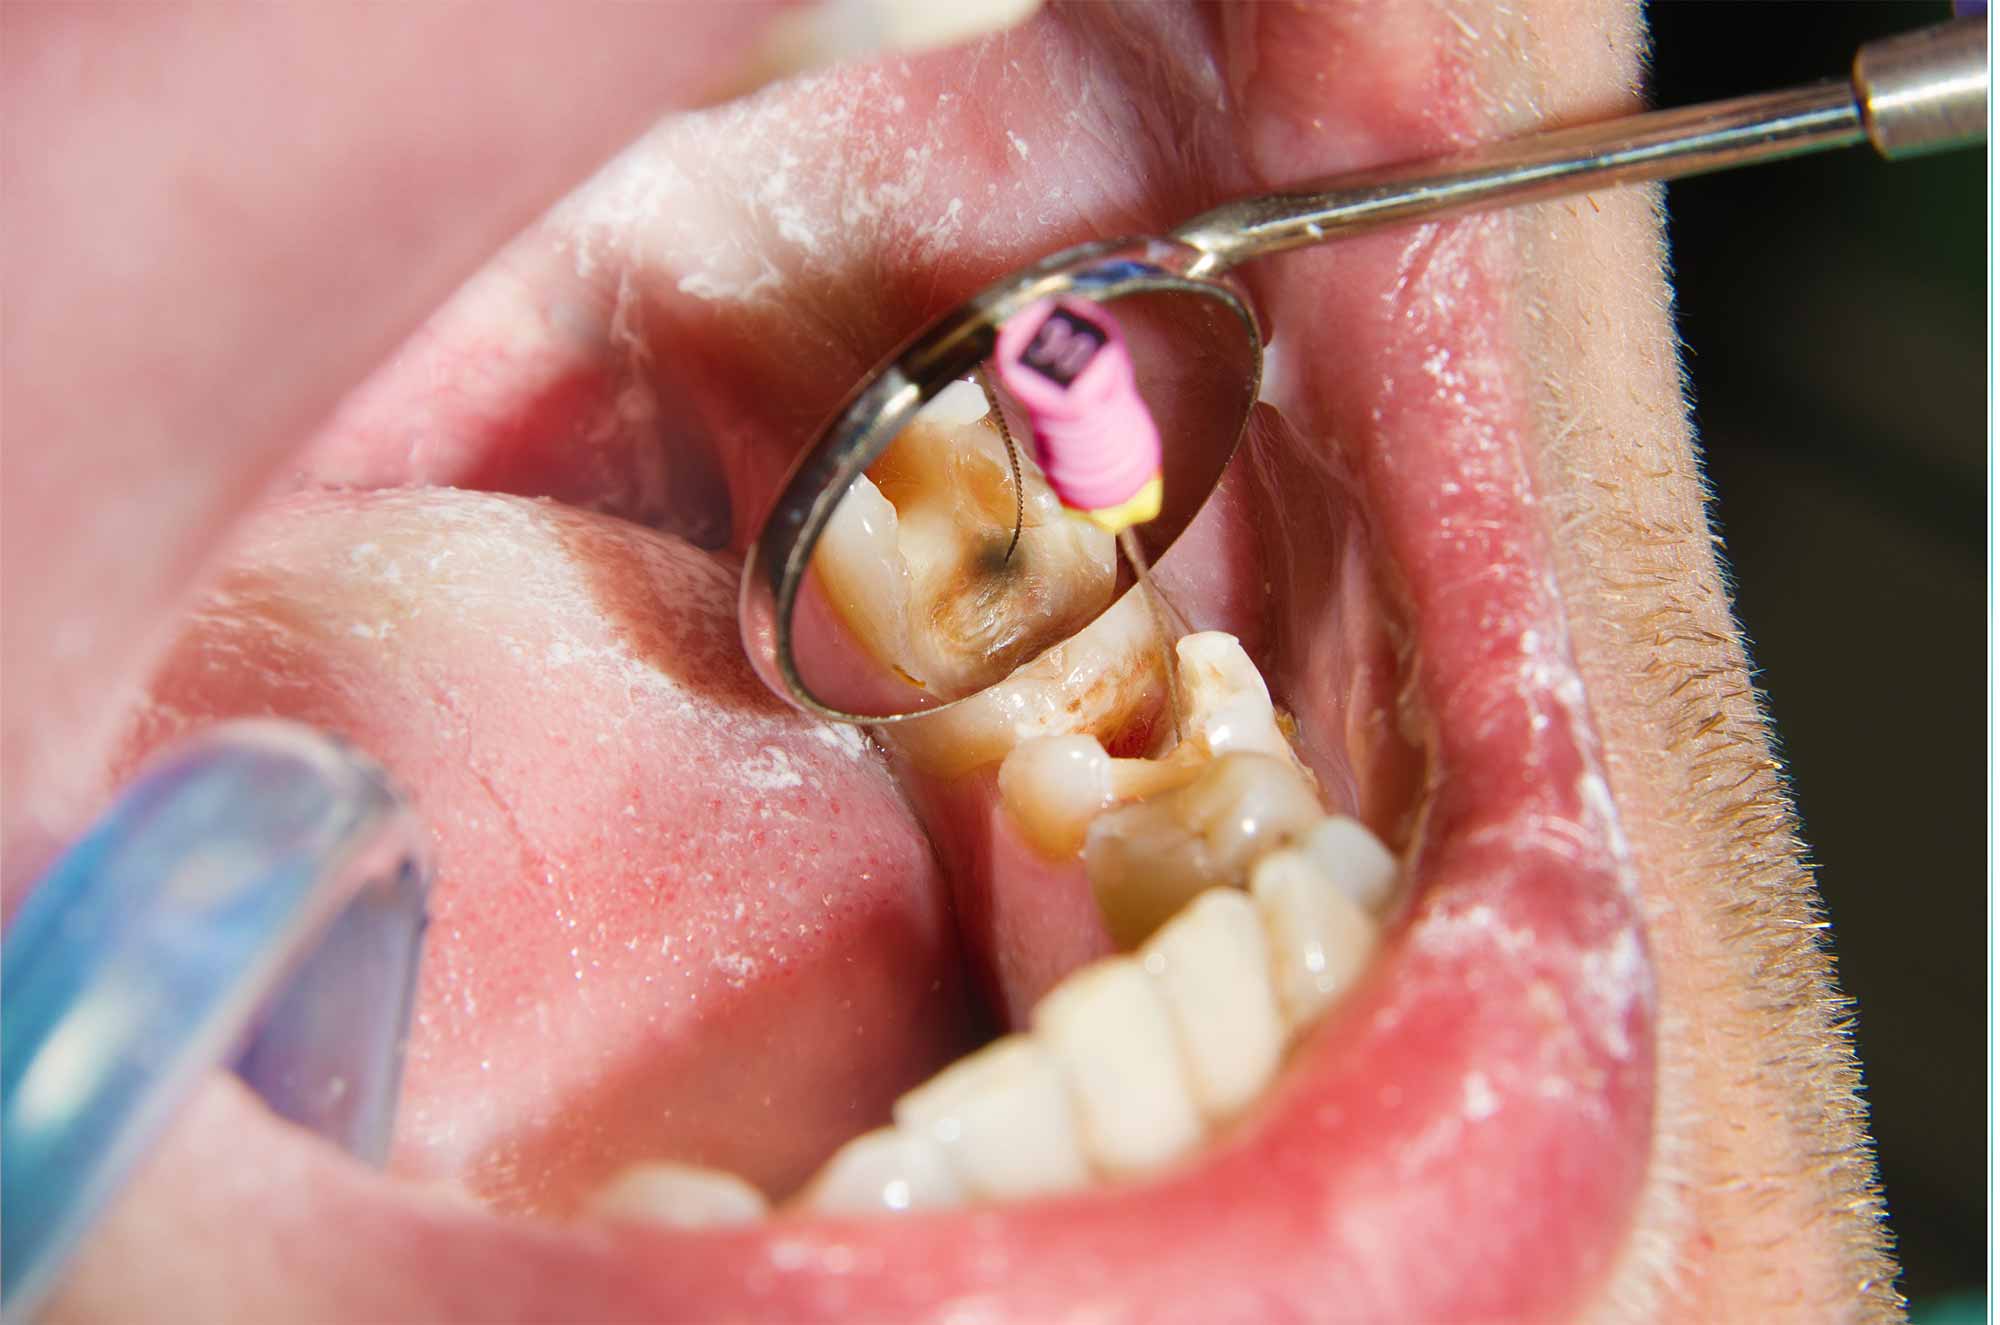 caries in a tooth at dentists